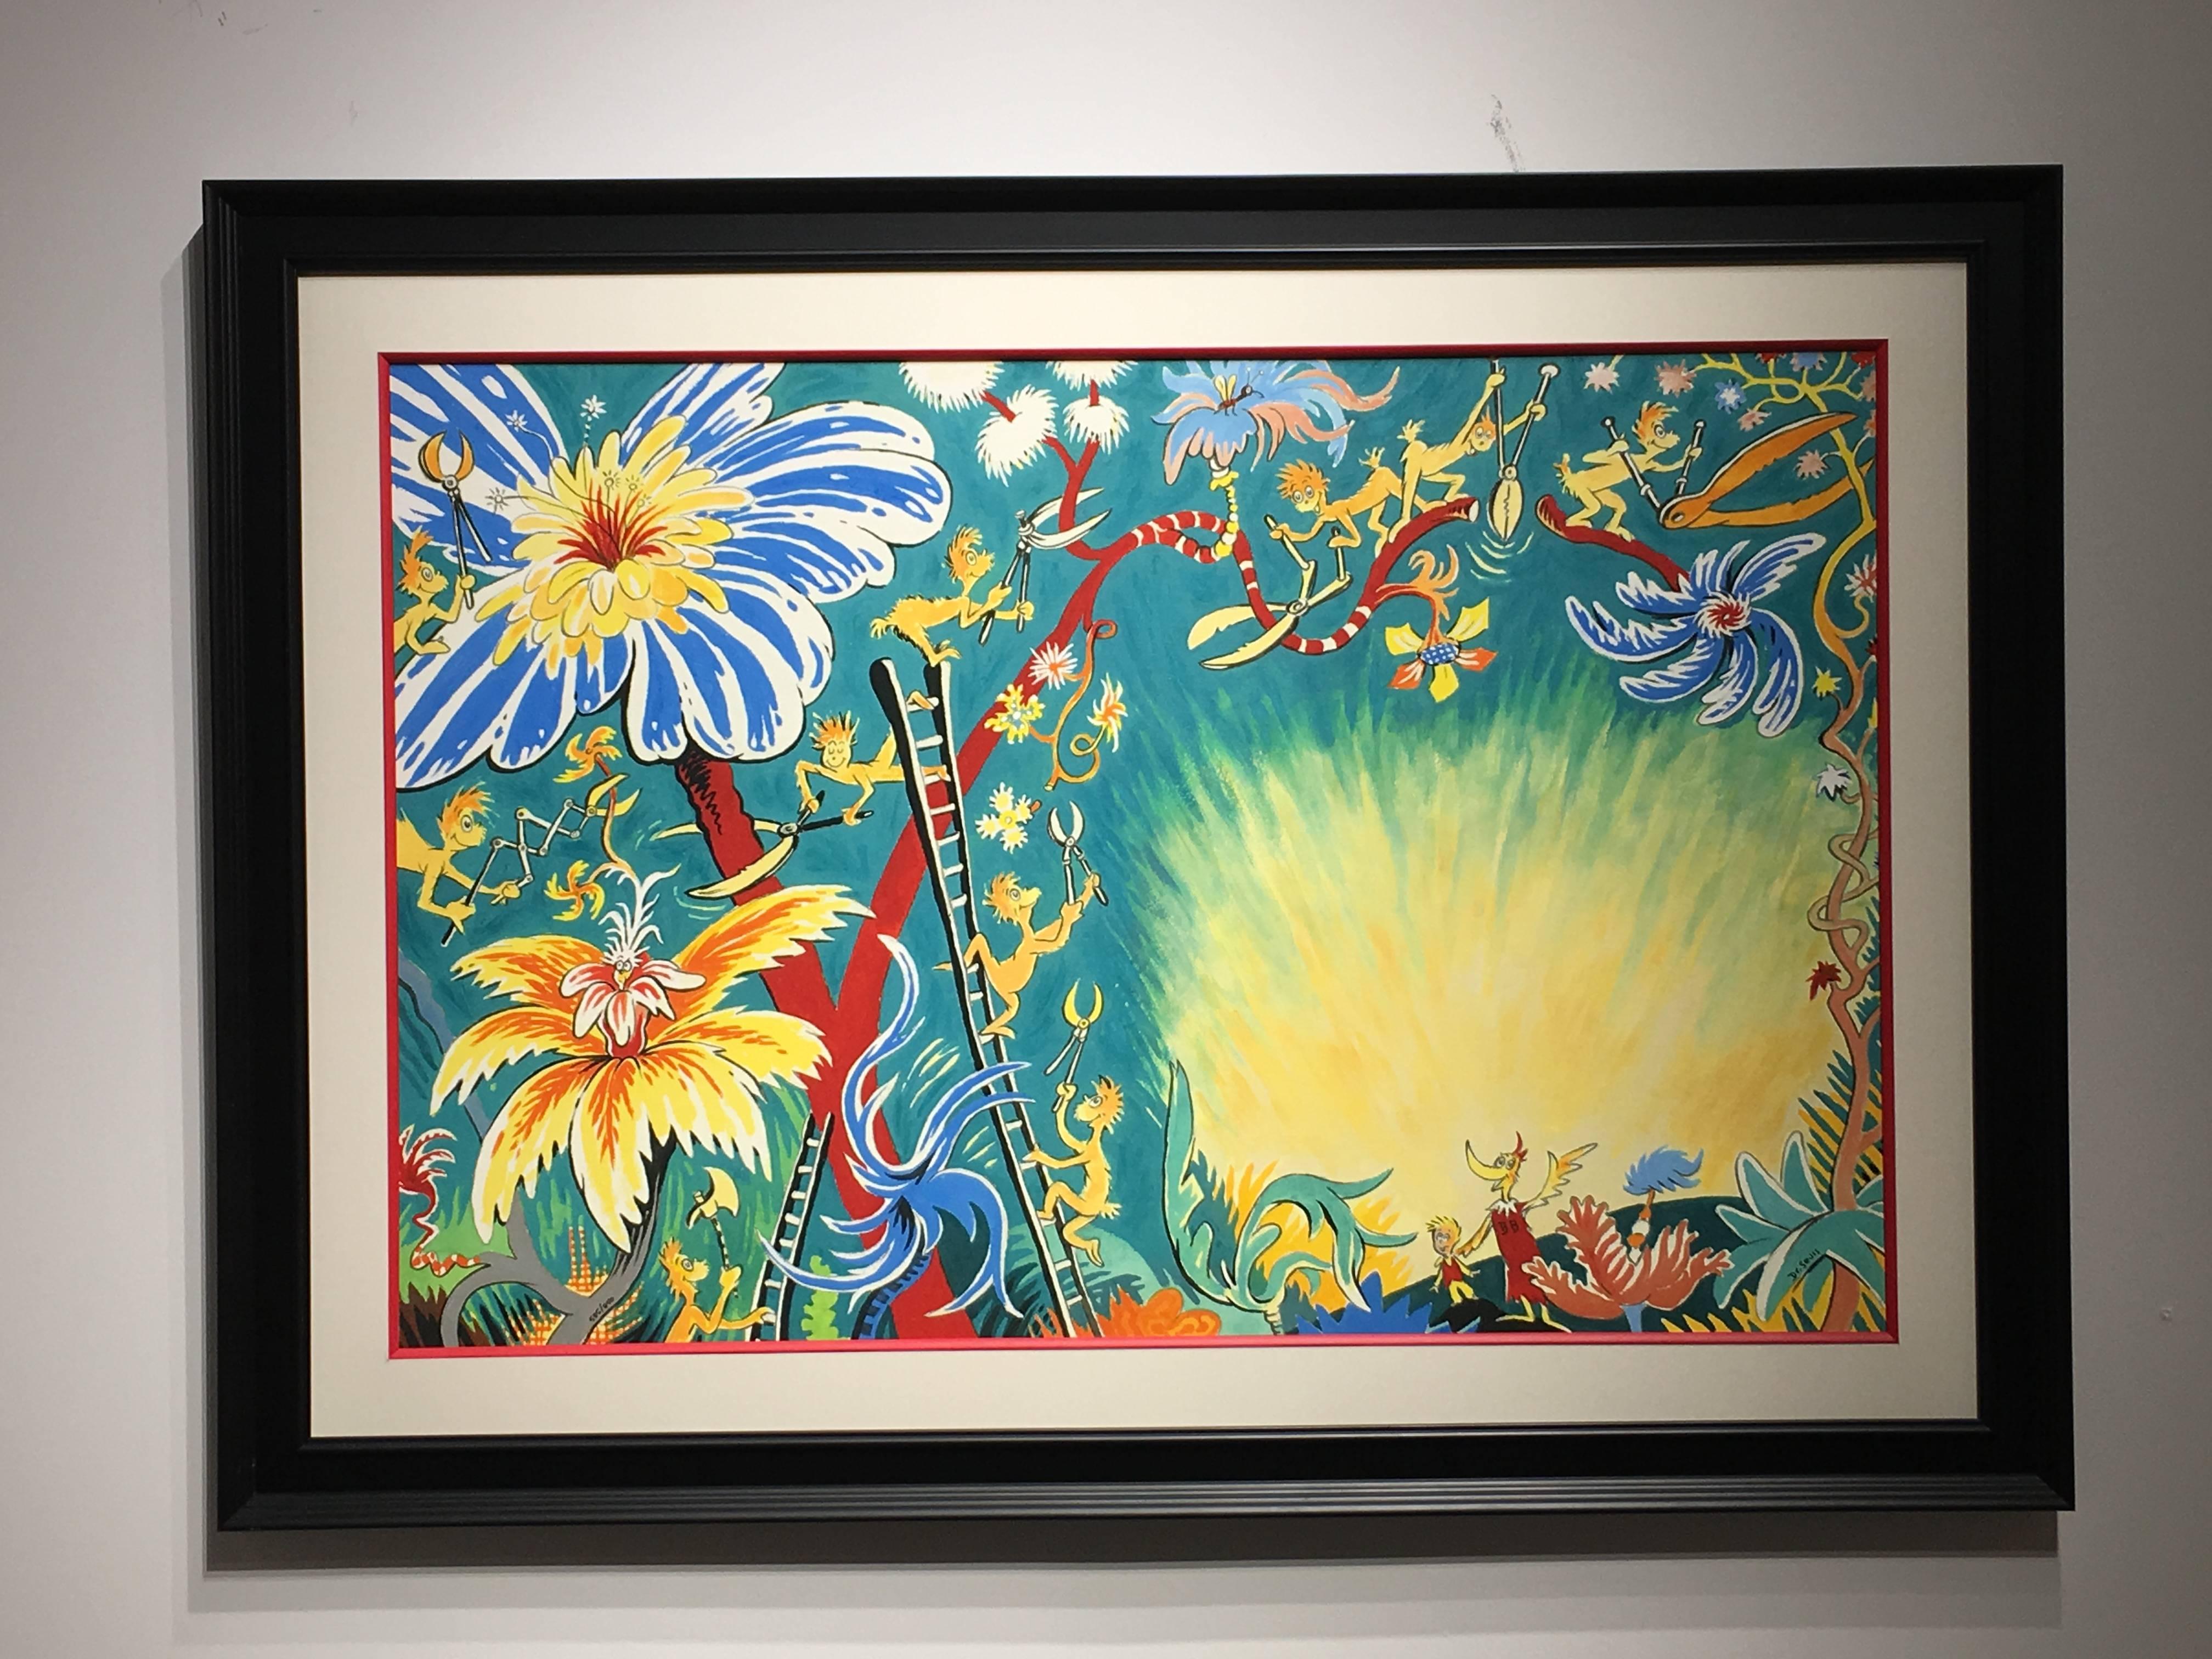 Dr. Seuss, A Plethora of Flowers  - Art by Dr. Seuss (Theodore Geisel)